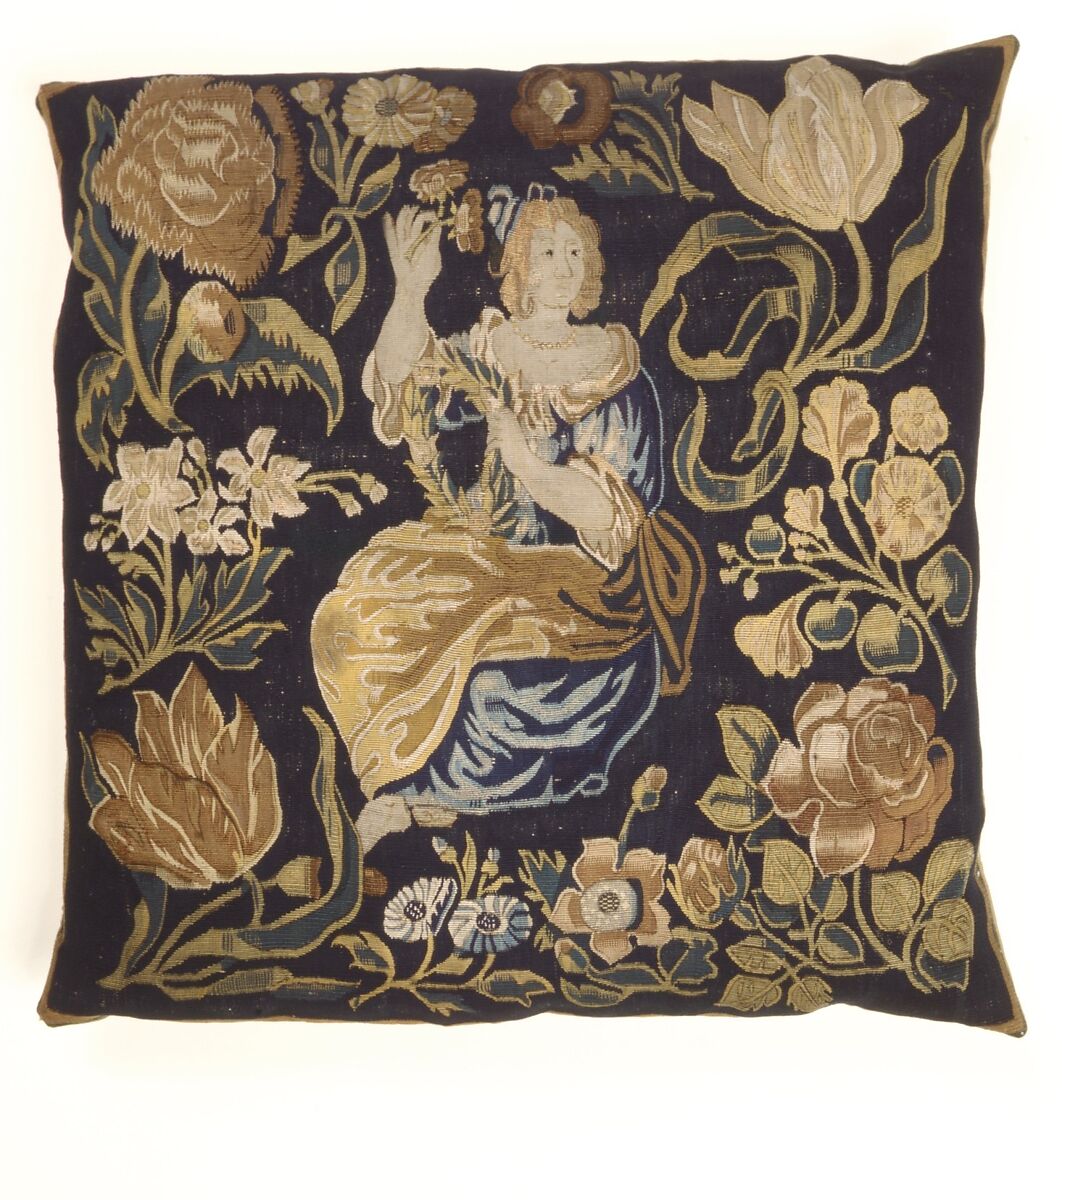 Cushion Cover with "Scent", Linen, silk, and wool in dovetailed tapestry weave; Backing: rayon and cotton warp-faced weft-ribbed pa;in weave, moiré; modern, Northern Netherlands